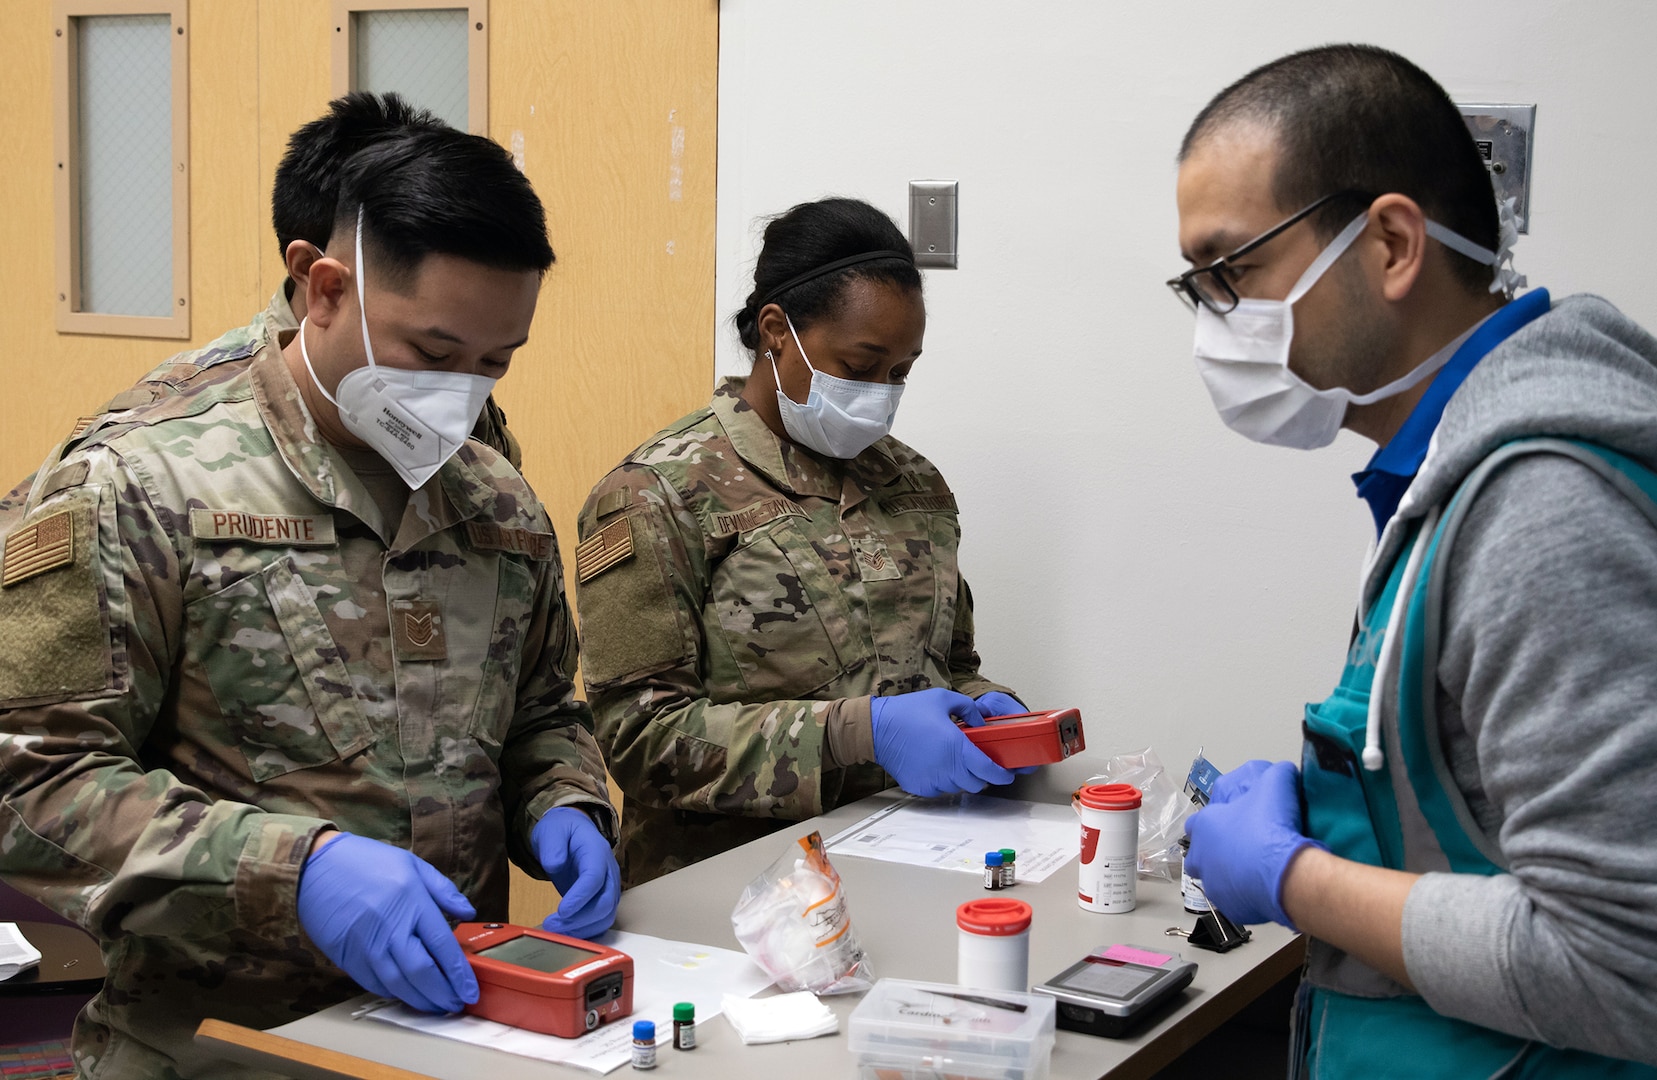 U.S. Air Force Tech Sgt. Jimel Prudente and Staff Sgt. Jasmine Devine-Taylor, assigned to 60th Medical Group stationed at Travis Air Force Base, Calif., train with civilian healthcare professionals on medical equipment at Harbor-UCLA Medical Center, Torrance, California, Jan. 7, 2021.